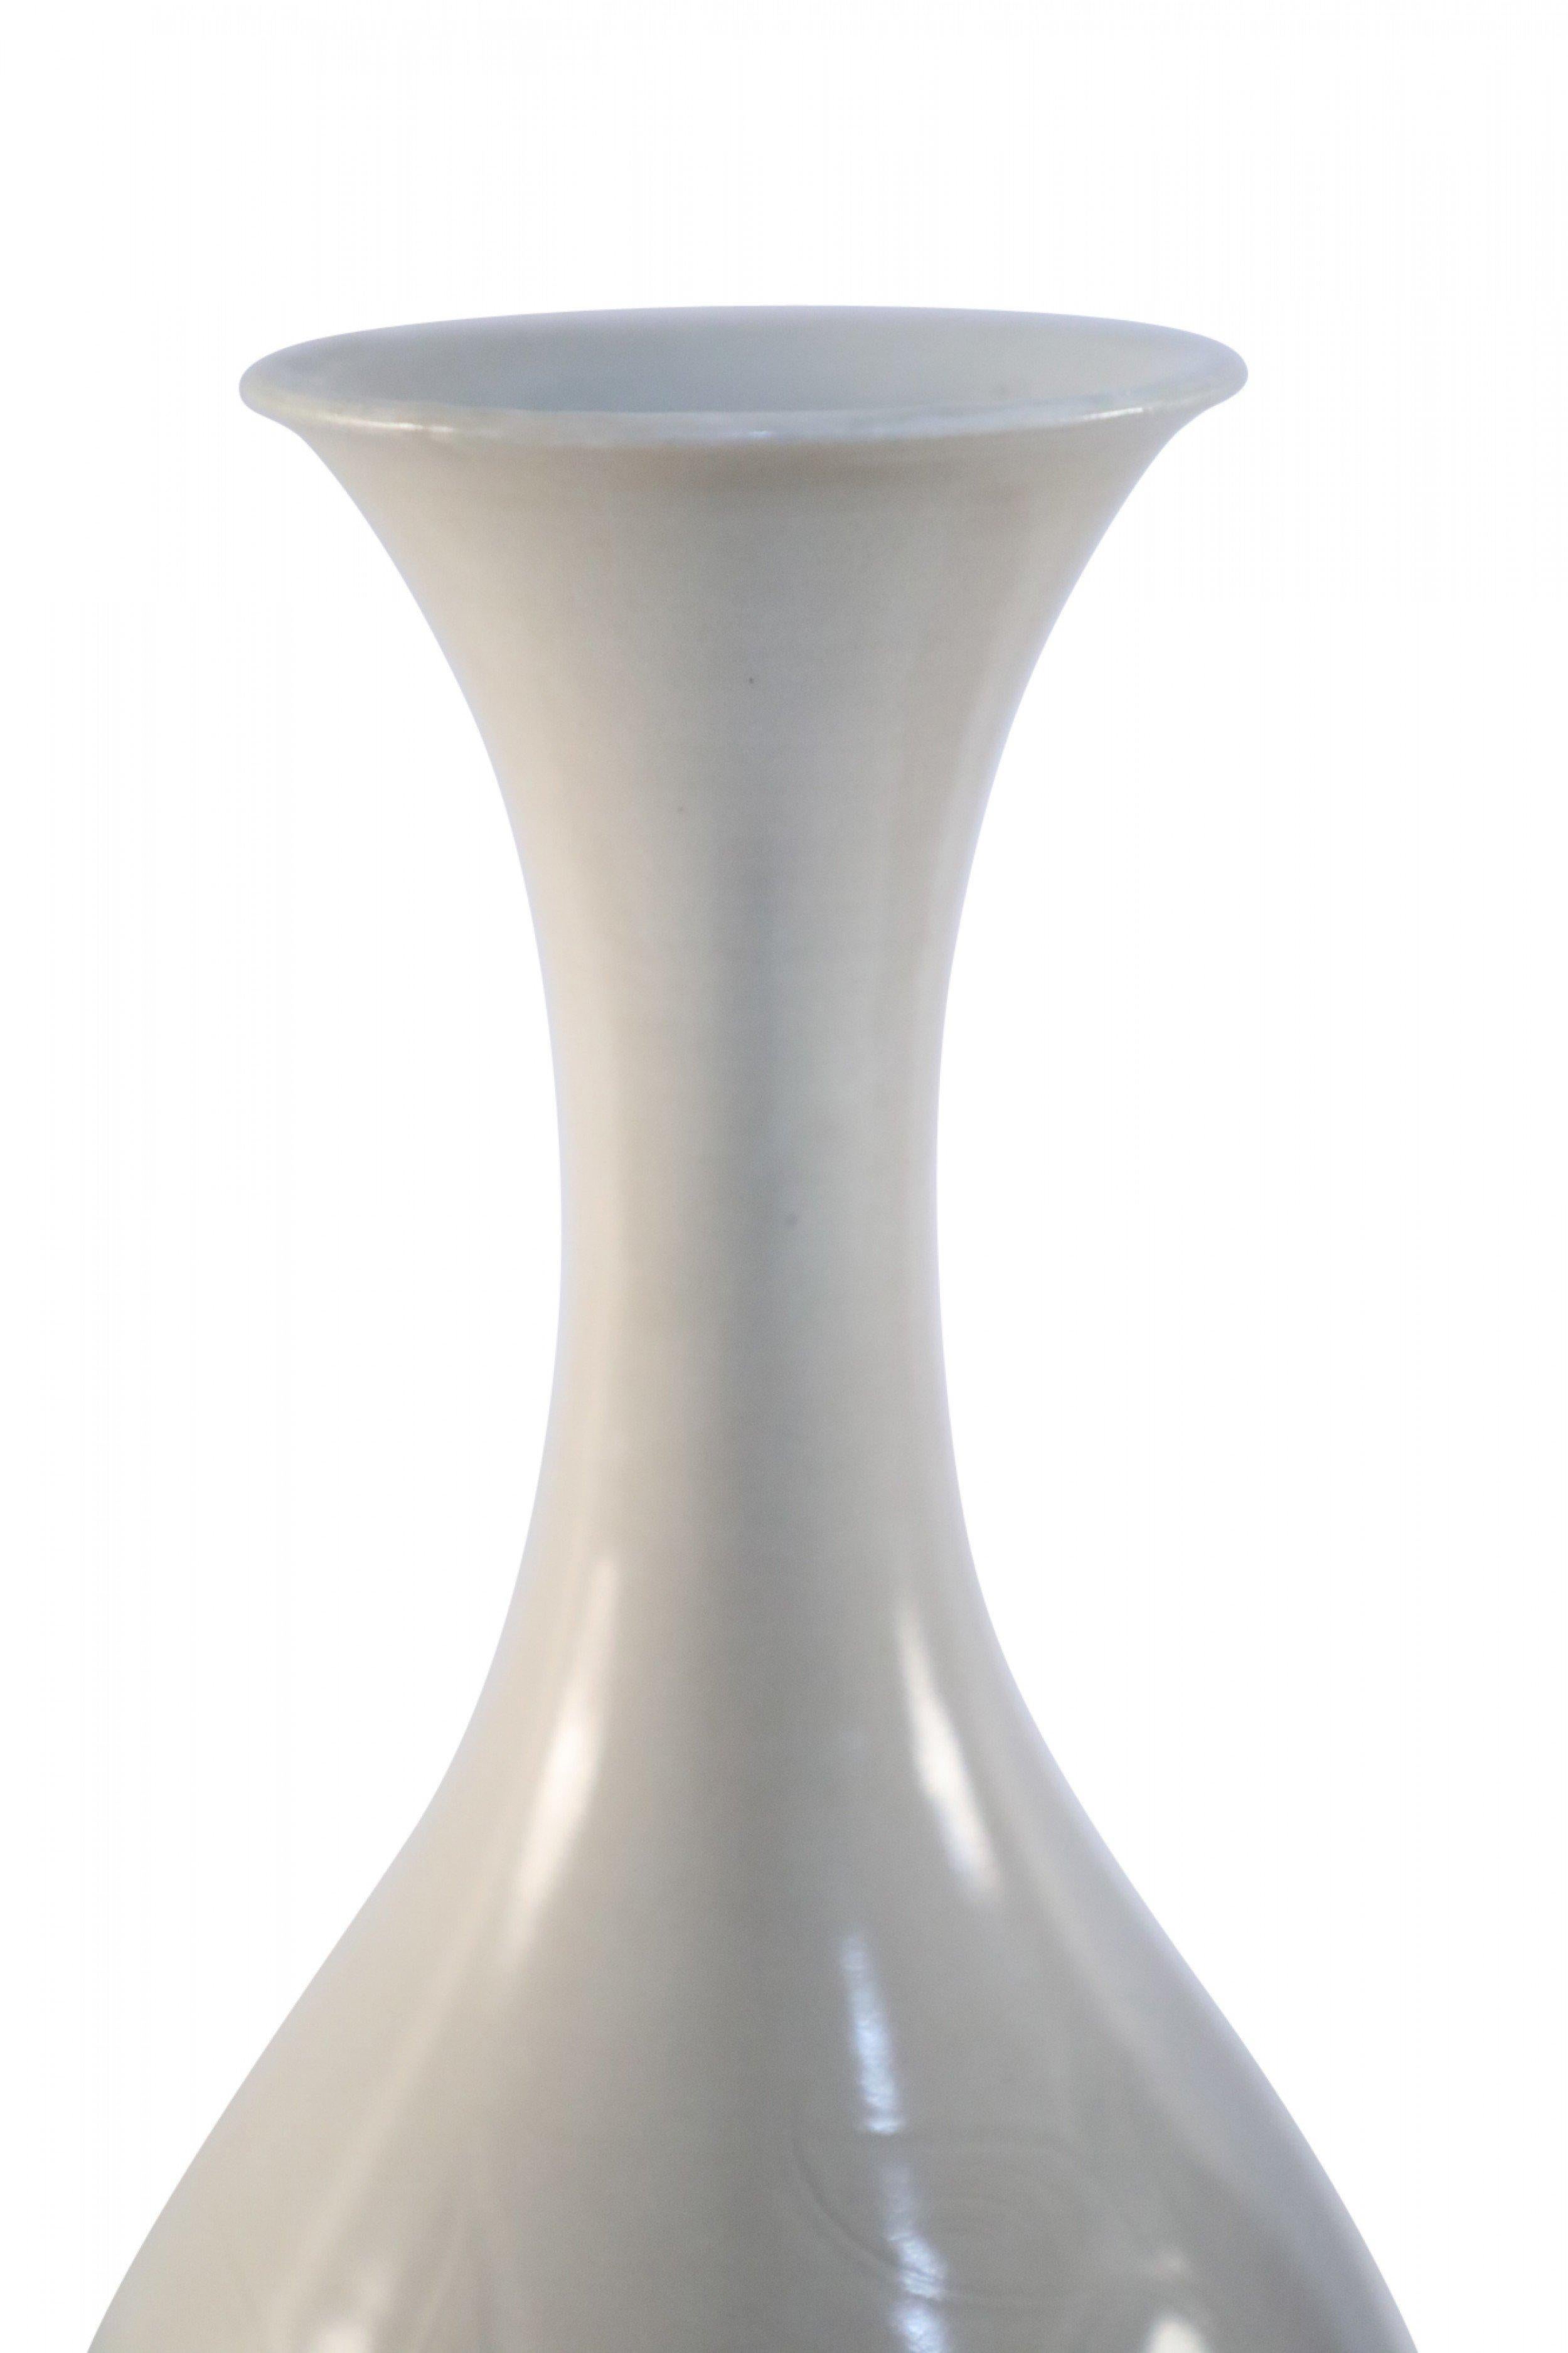 Chinese Off-White and Tonal Patterned Porcelain Vase For Sale 1